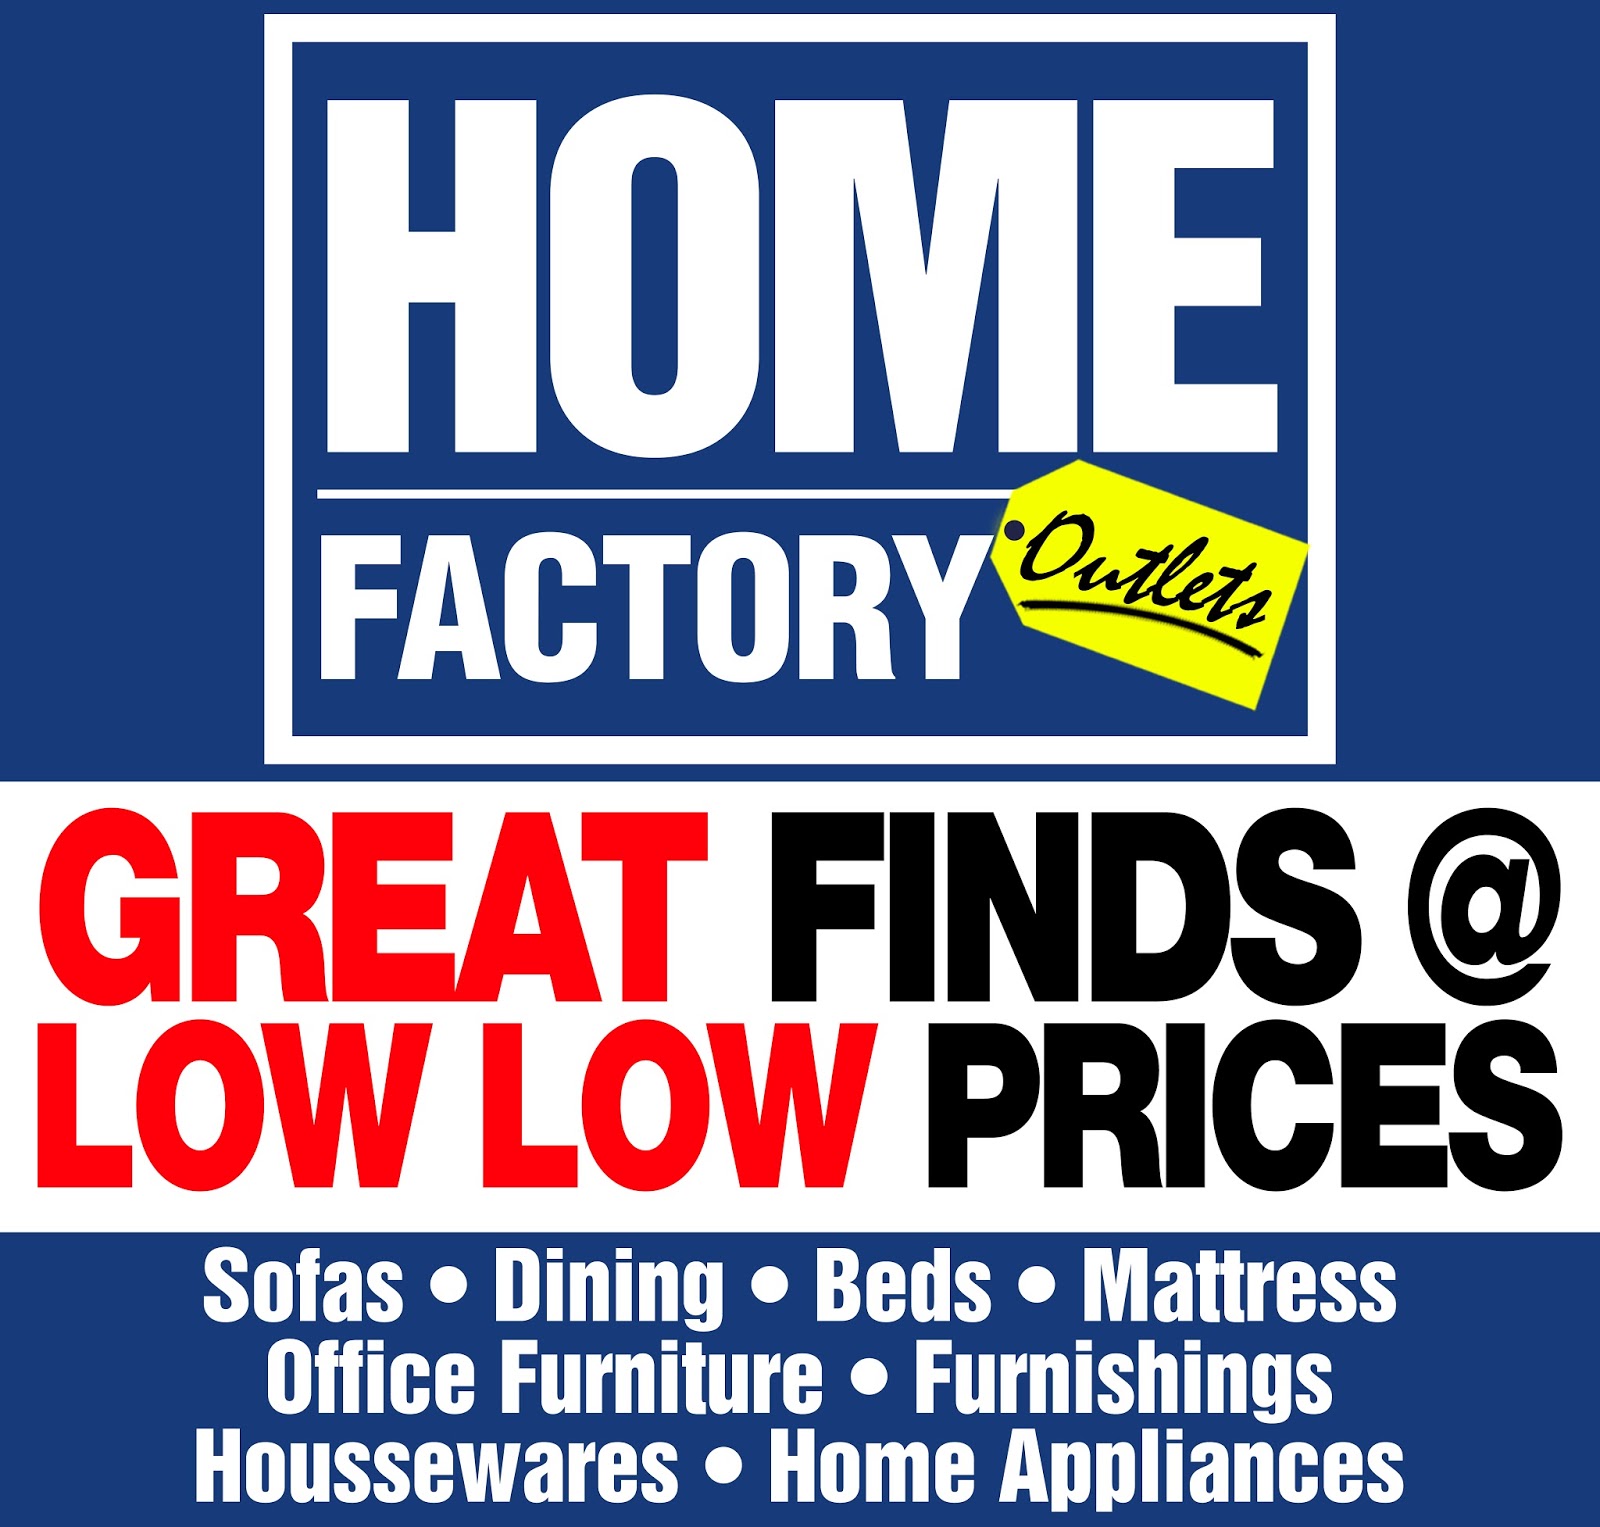 Home Factory Outlets Grand Opening Sale - EDnything